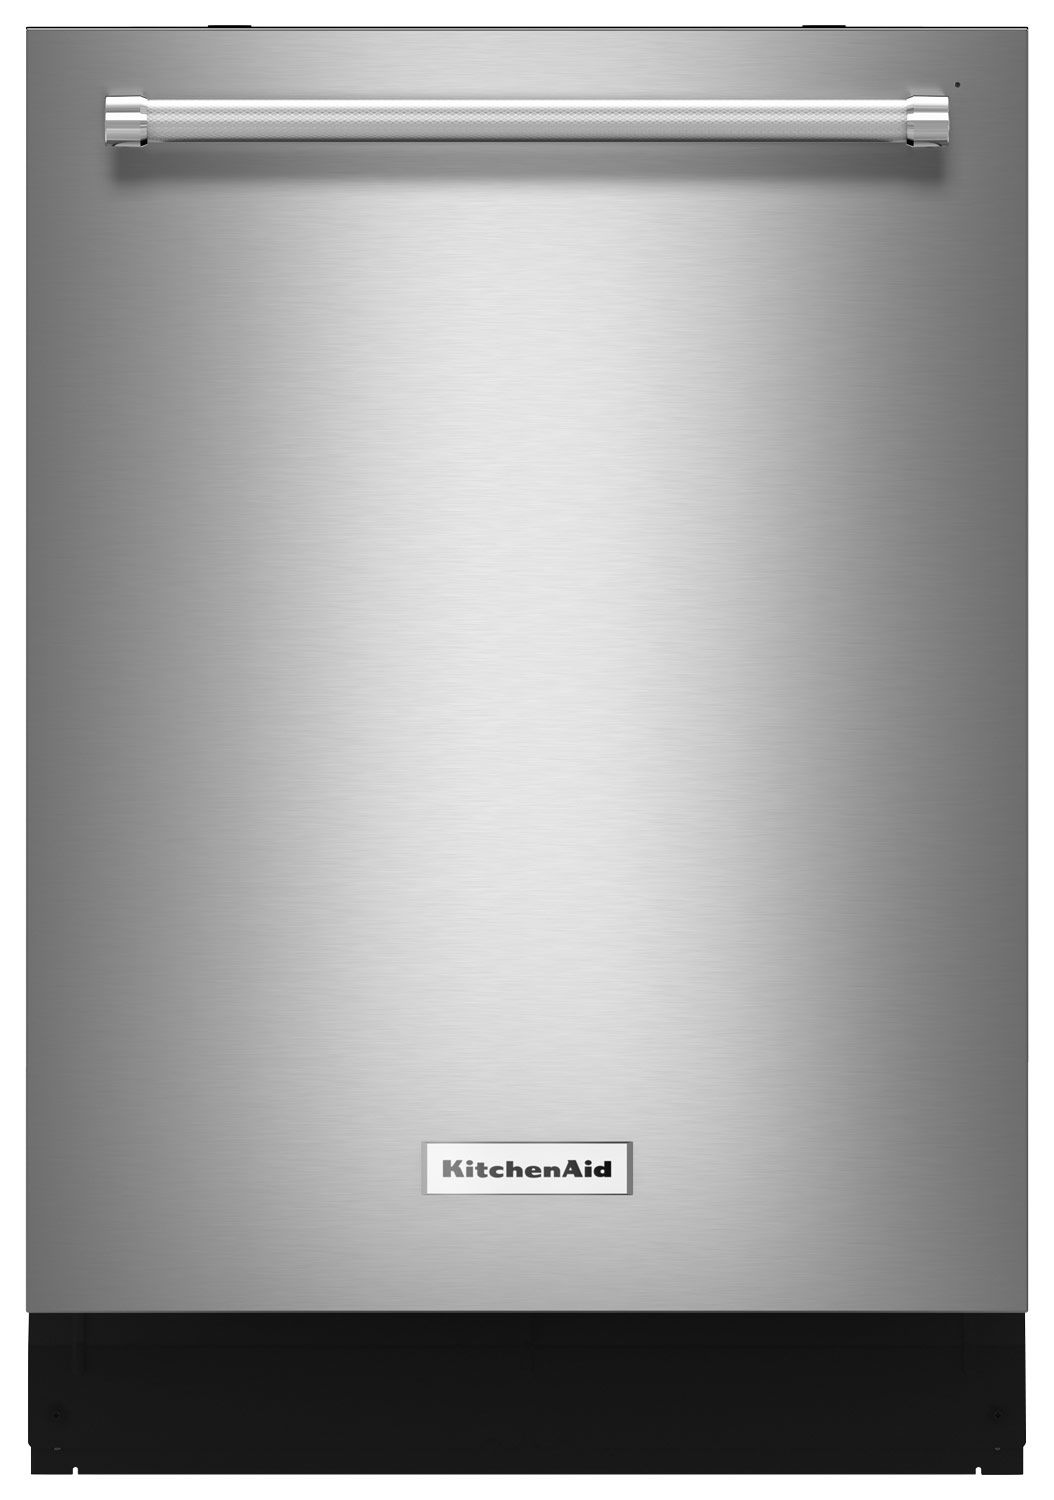 KitchenAid - 24"" Top Control Built-In Dishwasher with Stainless Steel Tub - Stainless steel | Best Buy U.S.